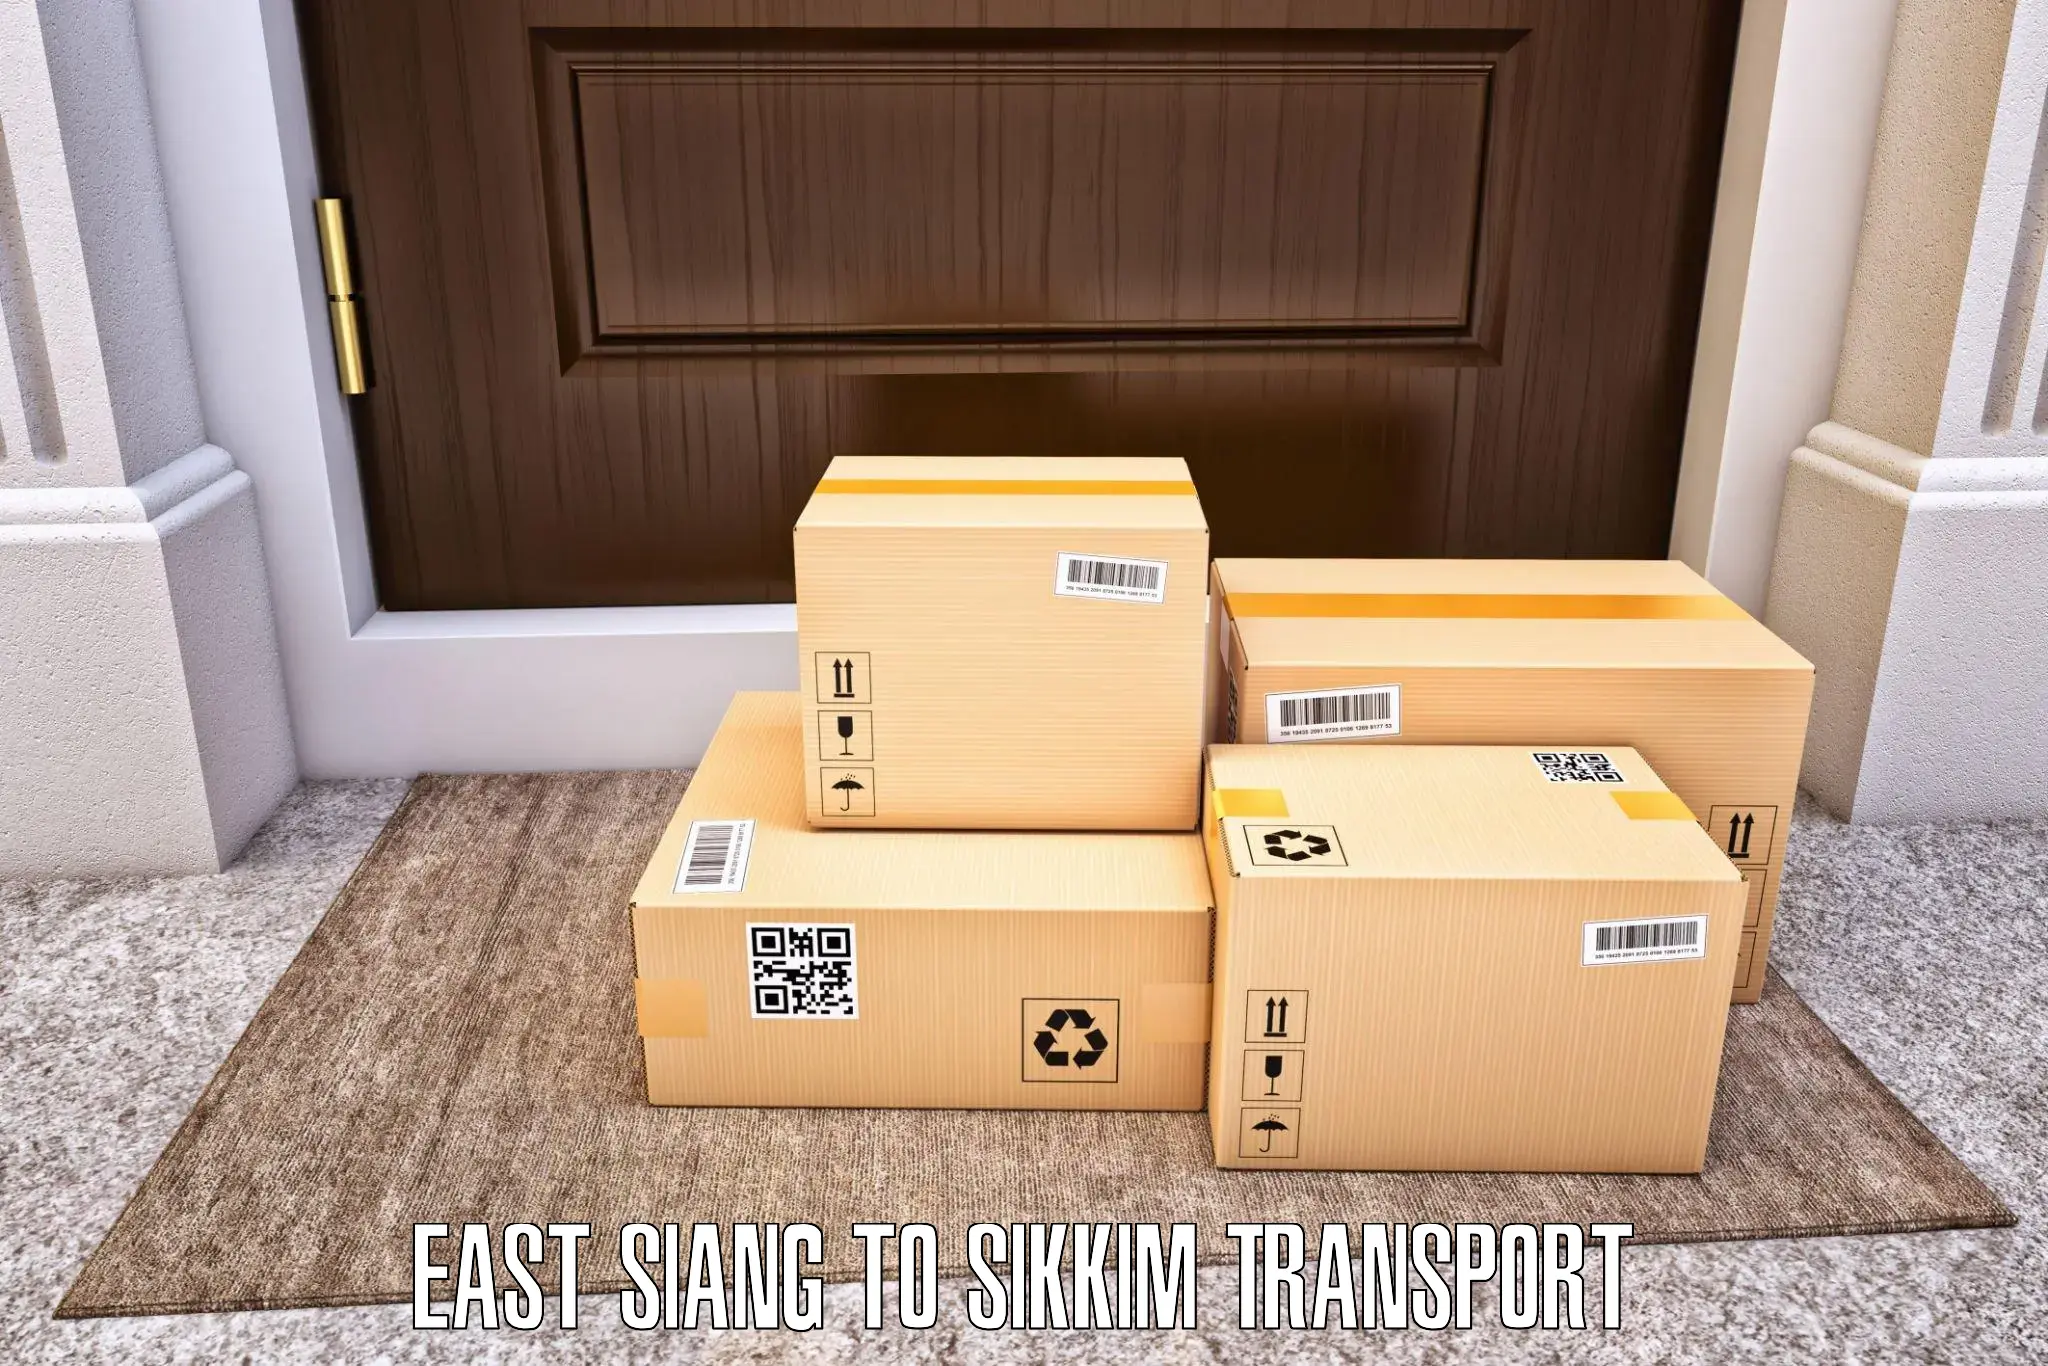 Nearby transport service East Siang to Sikkim